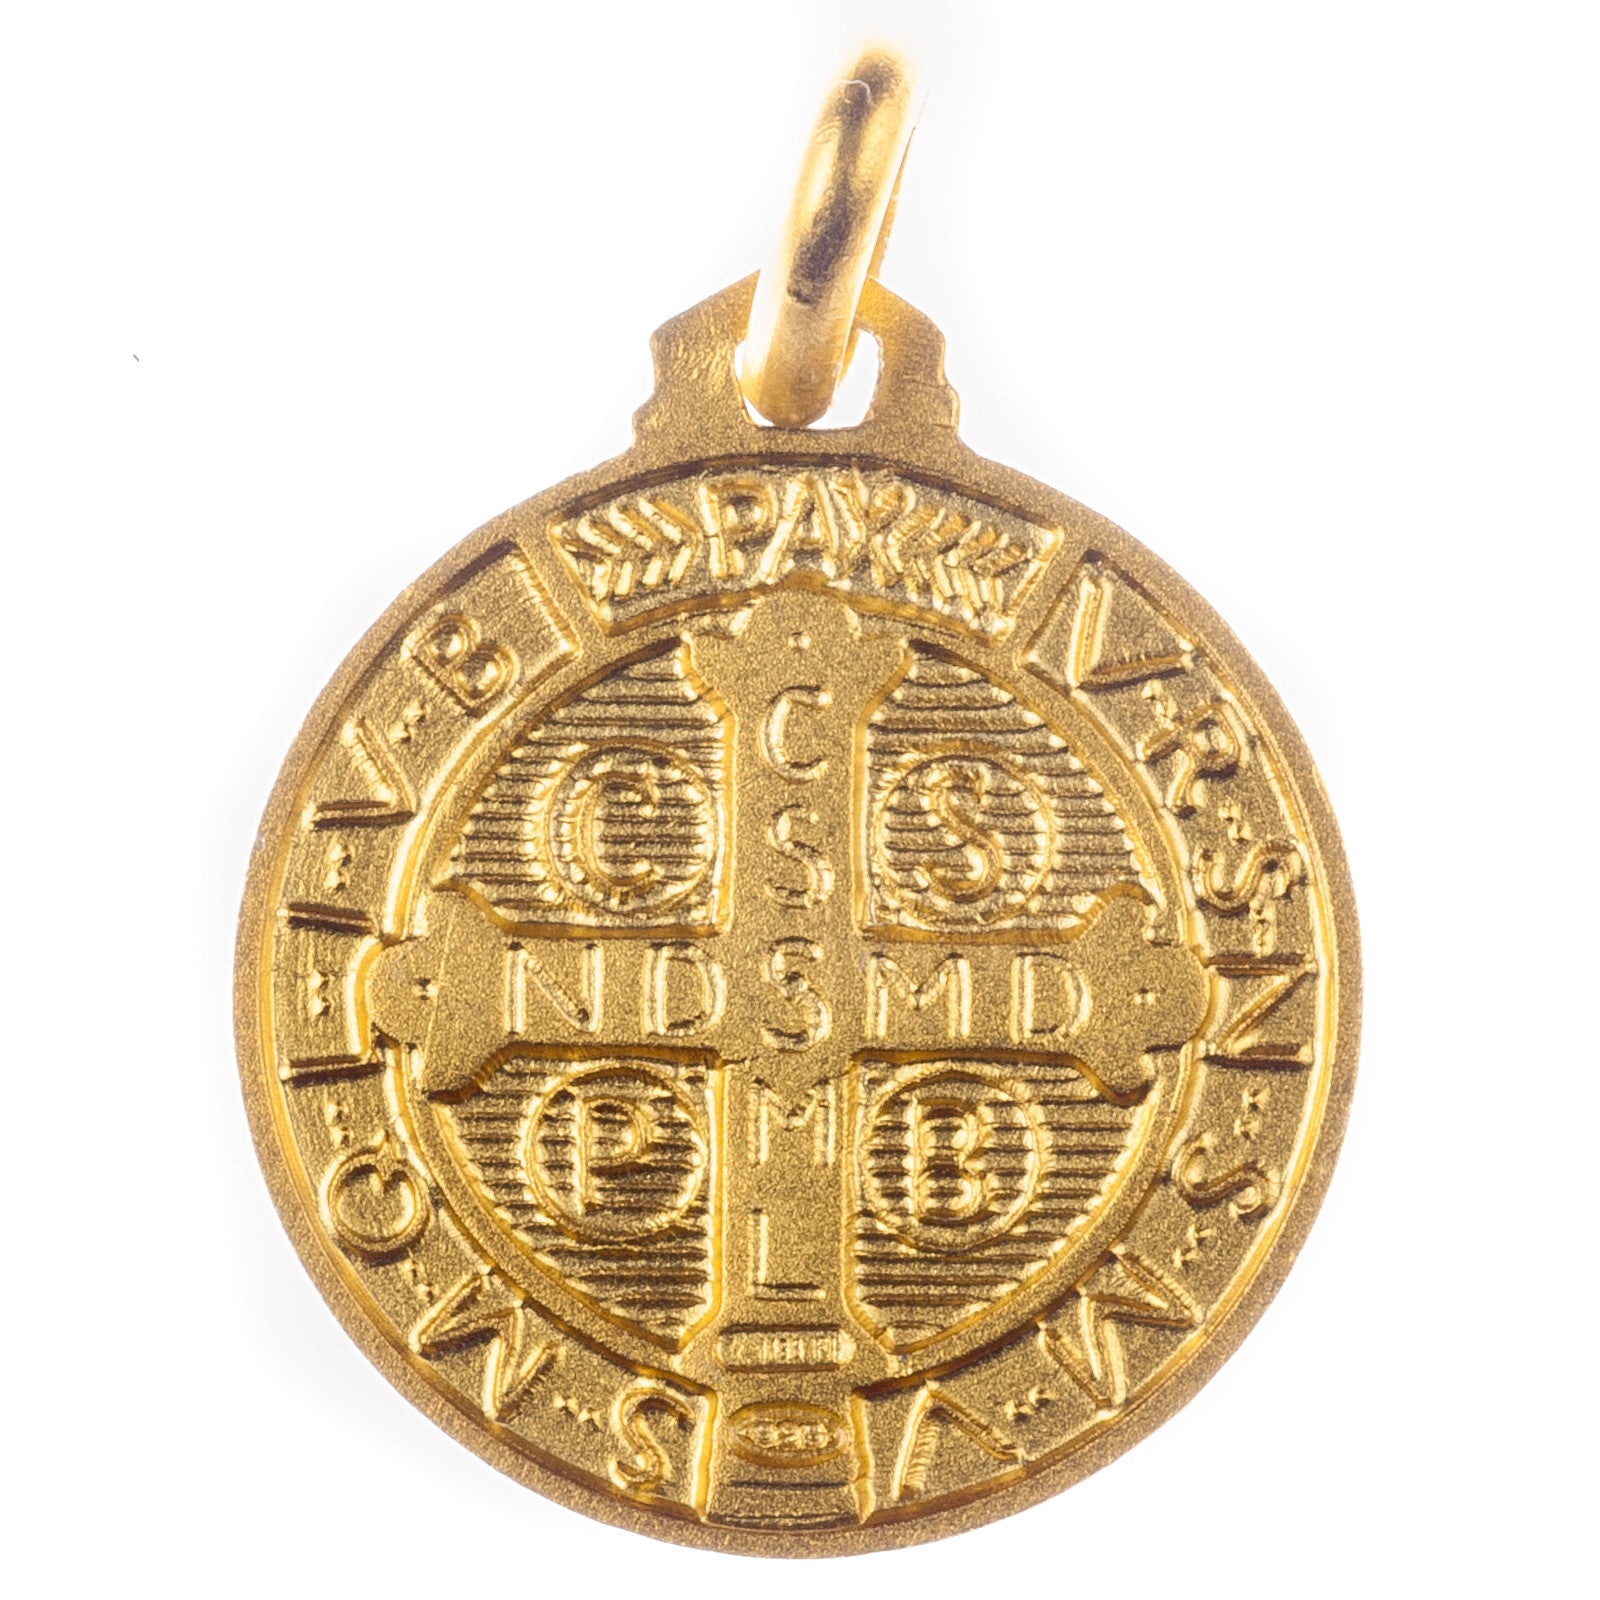 SILVER GOLD PLATED MEDAL OF SAINT BENEDICT - Nuova Galleria Mariana s.r.l - 2